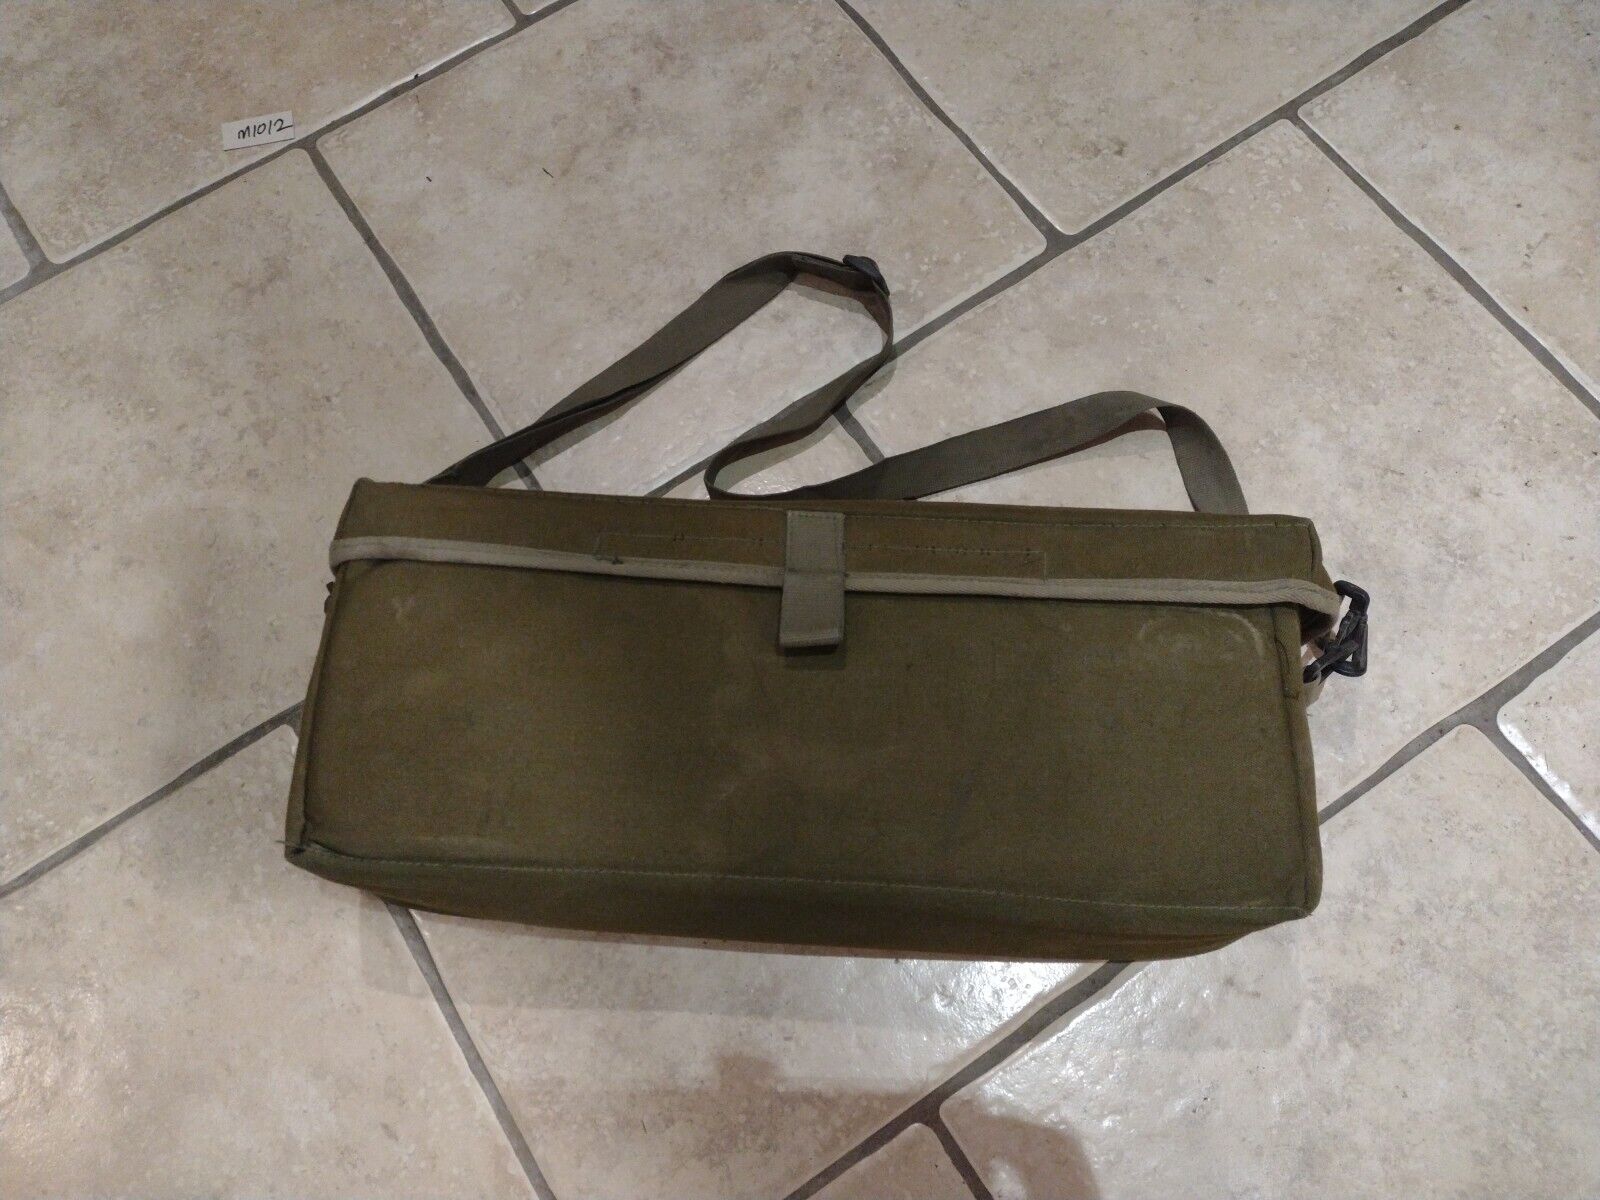 m1014 E - British Army (?) Equipment Bag - Green / OD - with internal pouch